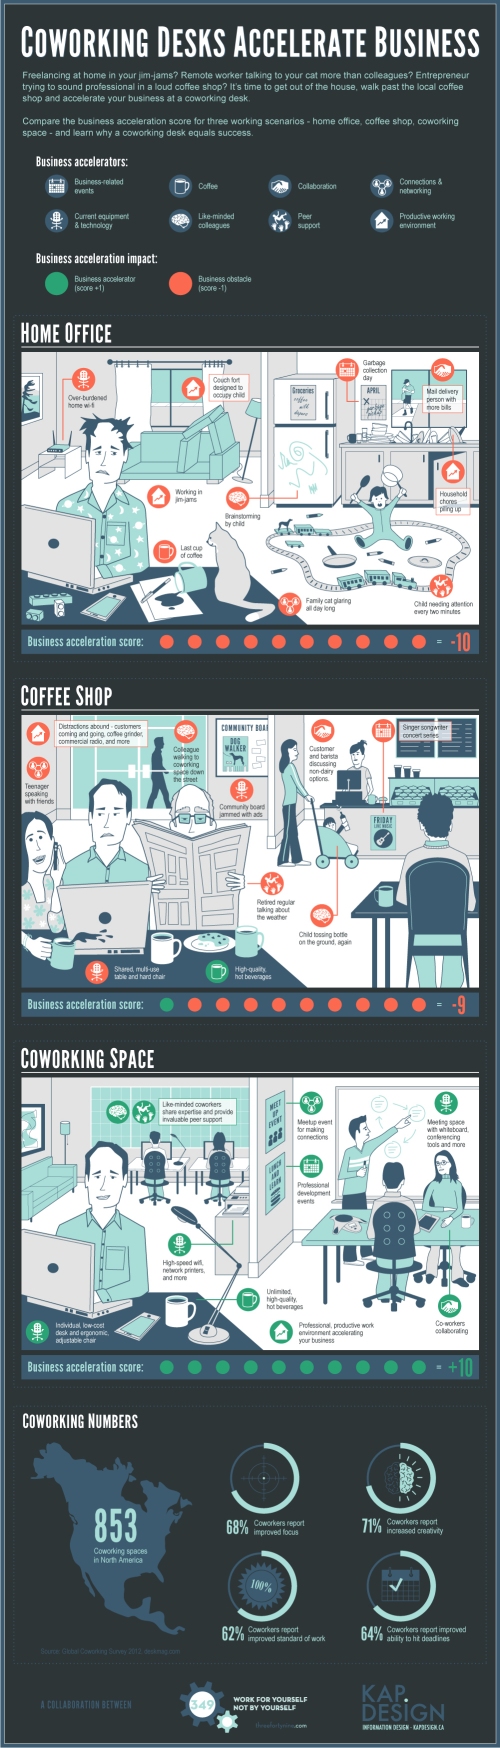 coworking-infographic-1000p